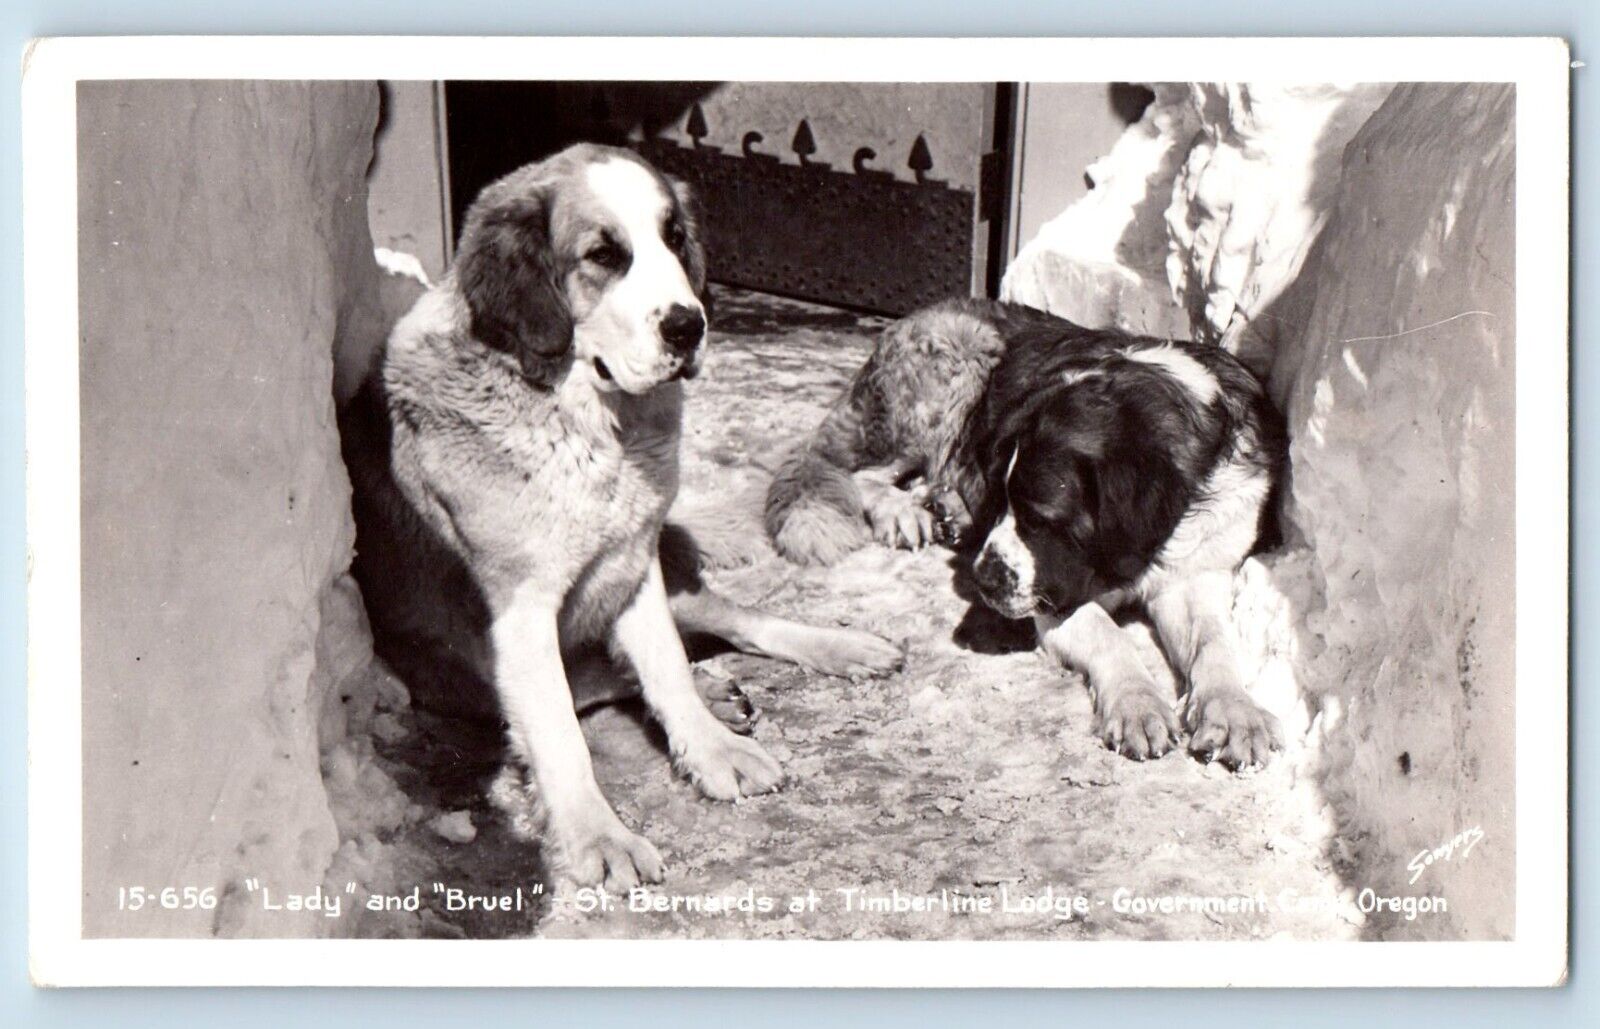 Oregon OR Postcard RPPC Photo Lady And Bruel St. Bernards At Timberland Lodge